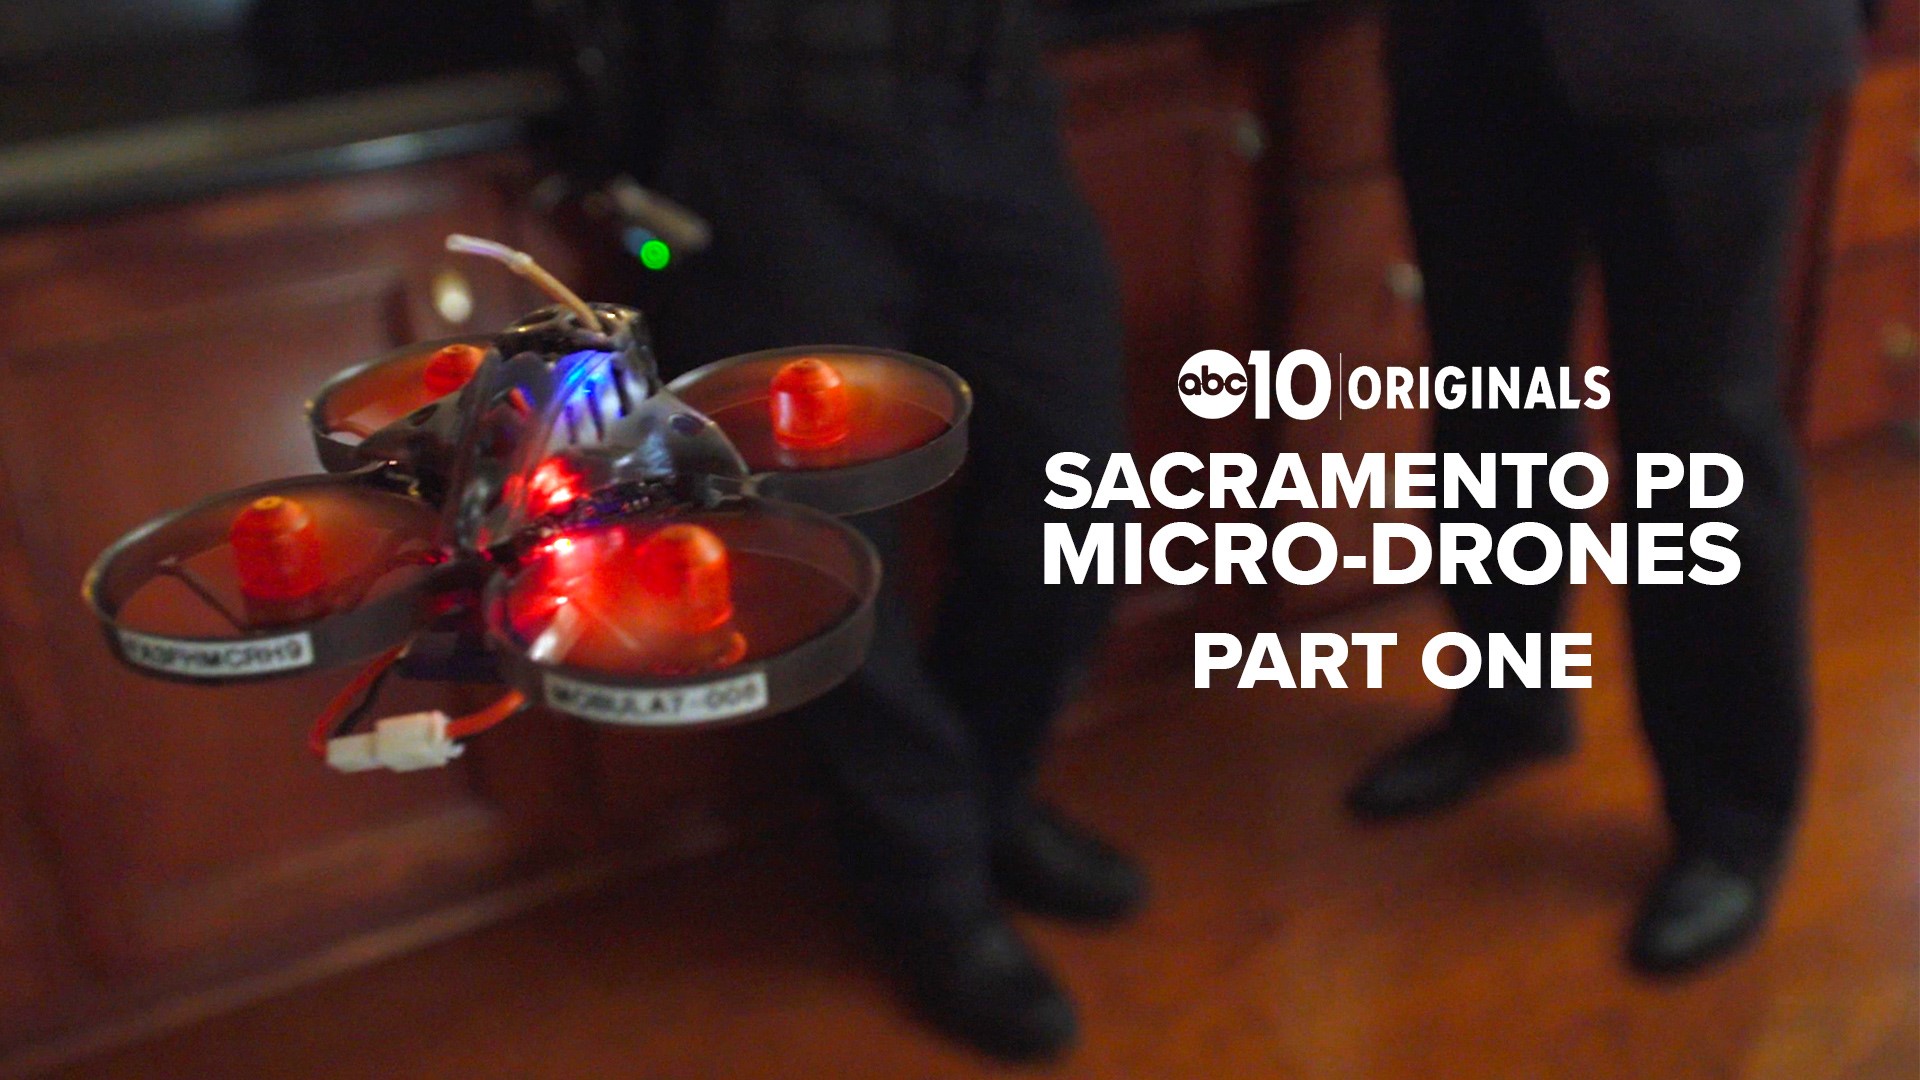 The Sacramento Police Department is the first department in the nation using cutting edge micro-drones indoors. They're supposed to reduce risk during conflicts.